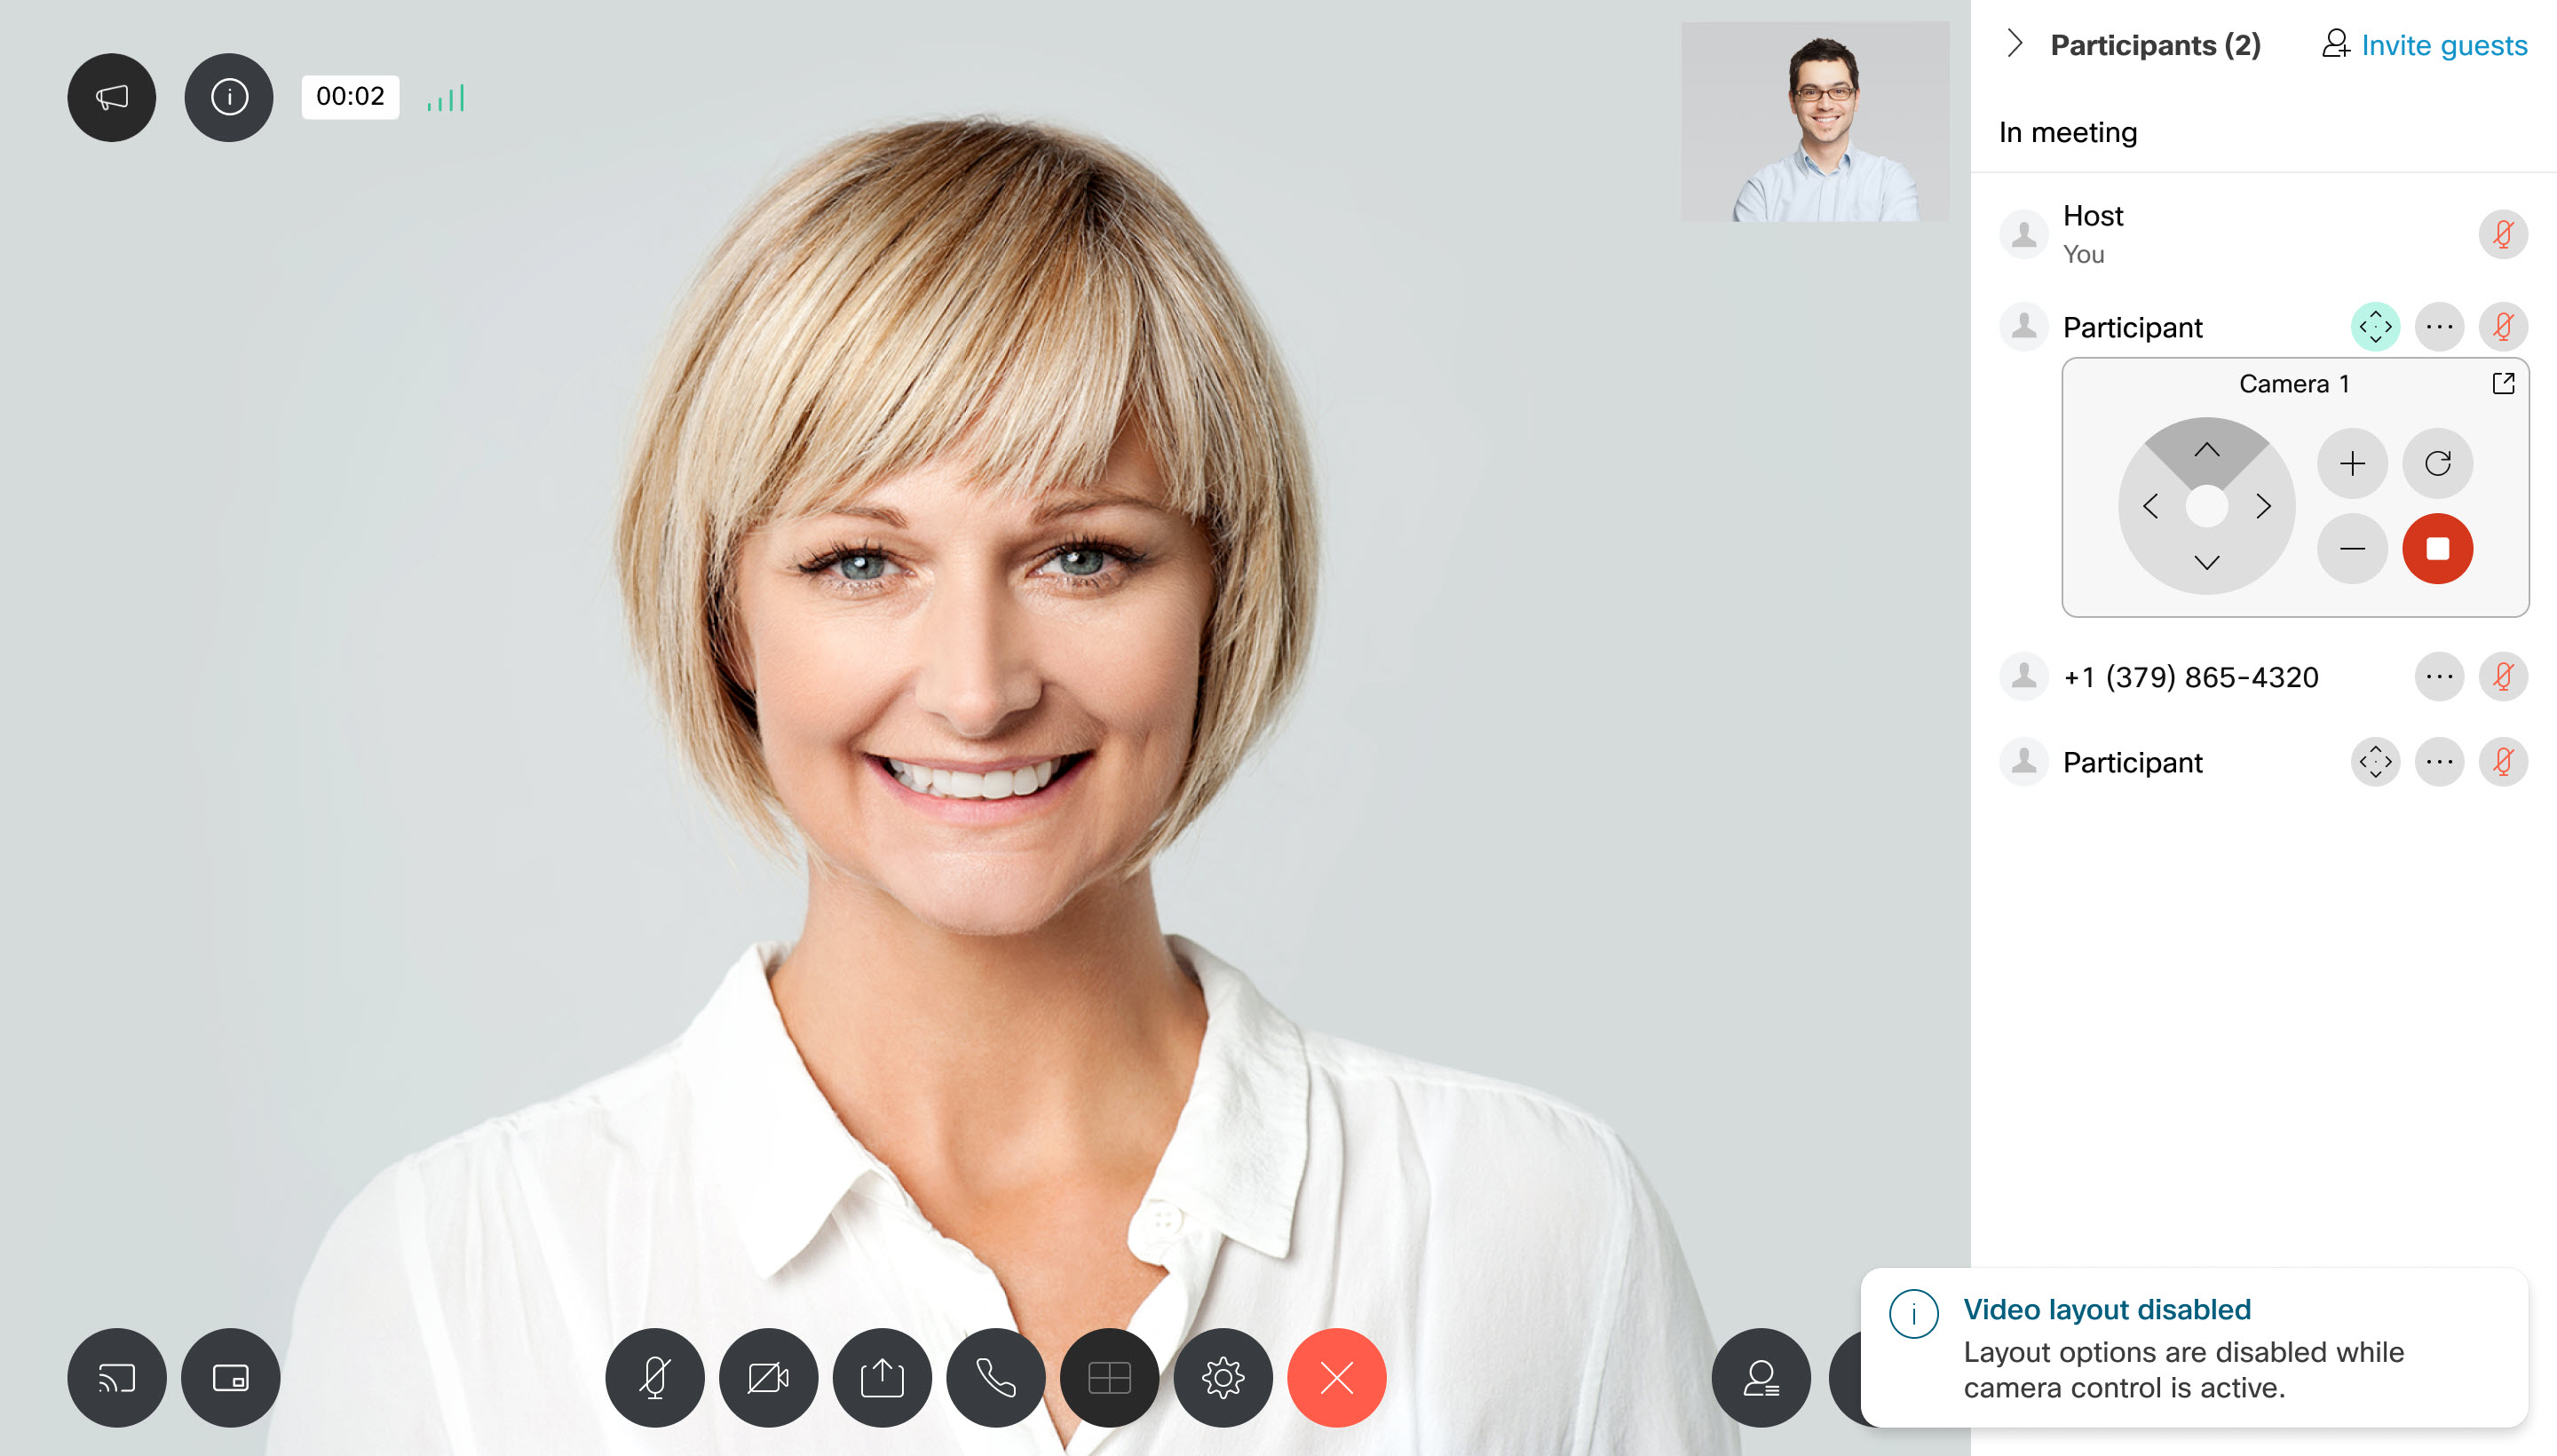 The Webex Instant Connect main application screen.